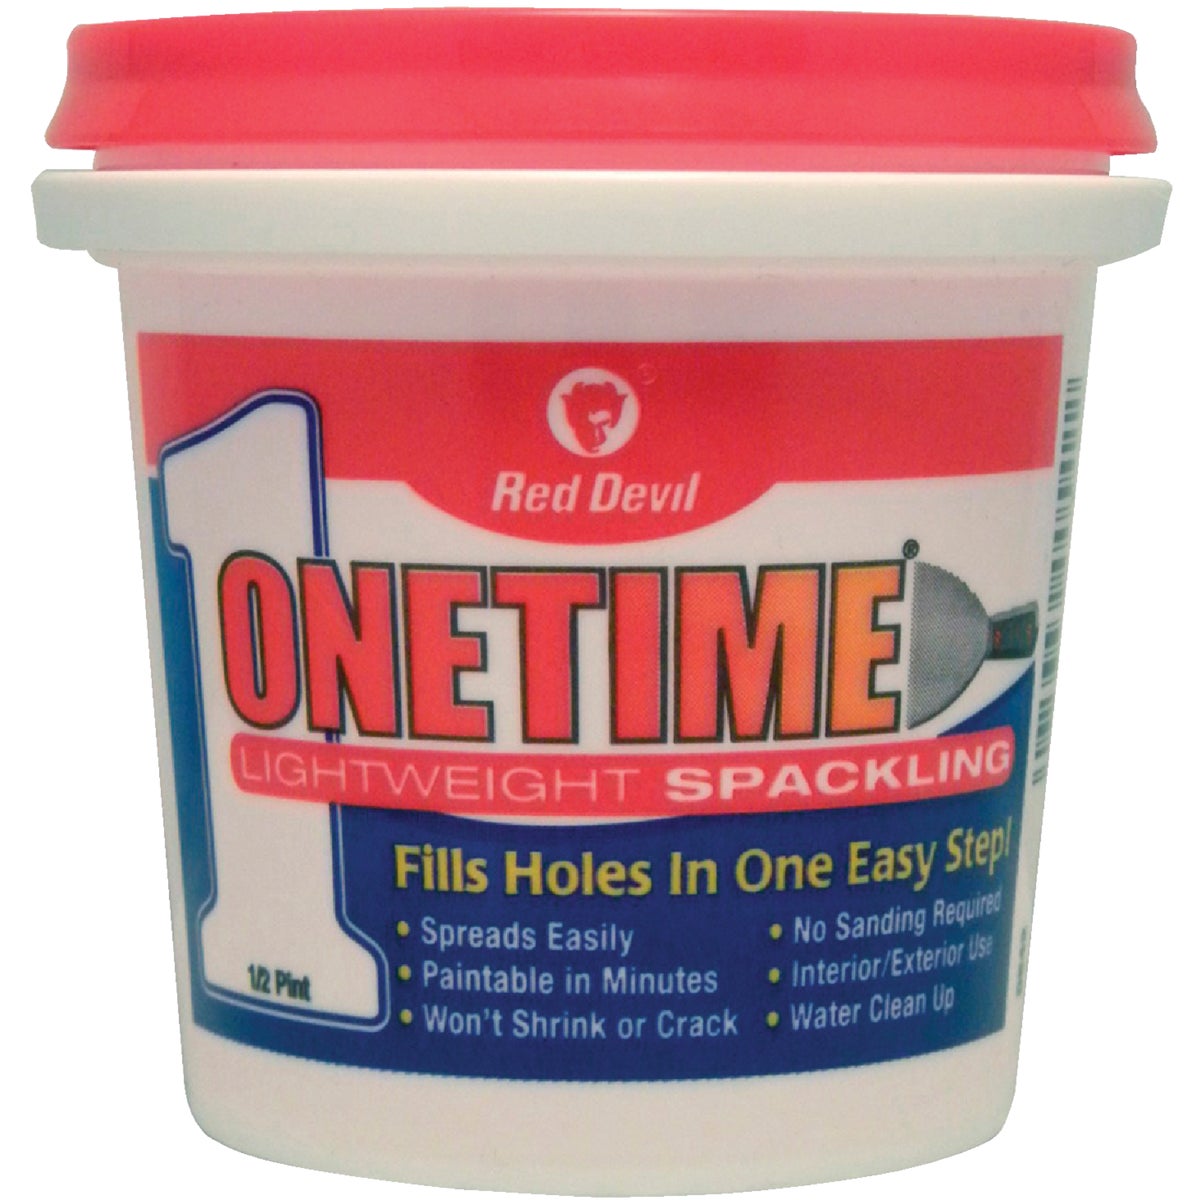 Item 790246, Onetime Lightweight Spackling fills dents, cracks, nail holes and other 